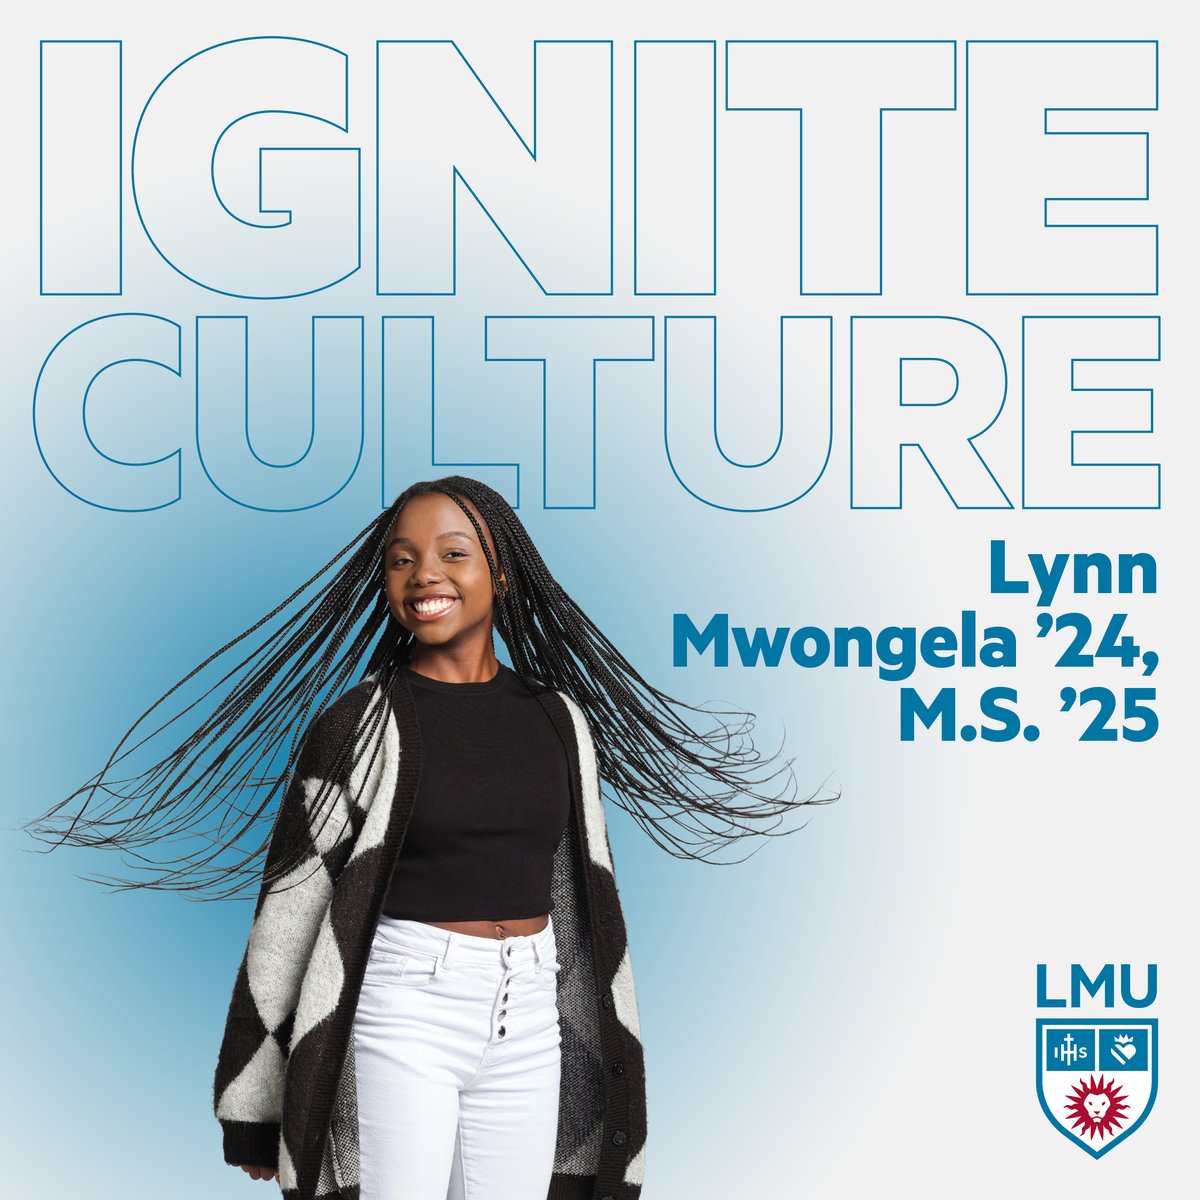 With guidance from her @lmucba professors, Lynn Mwongela ’24, M.S. ’25 has found success in accounting – including a @PwCUS internship, serving as president of LMU's Accounting Society, & she plans to earn her master’s through LMU’s 4+1 program: bit.ly/LMU__LM #LMUignite